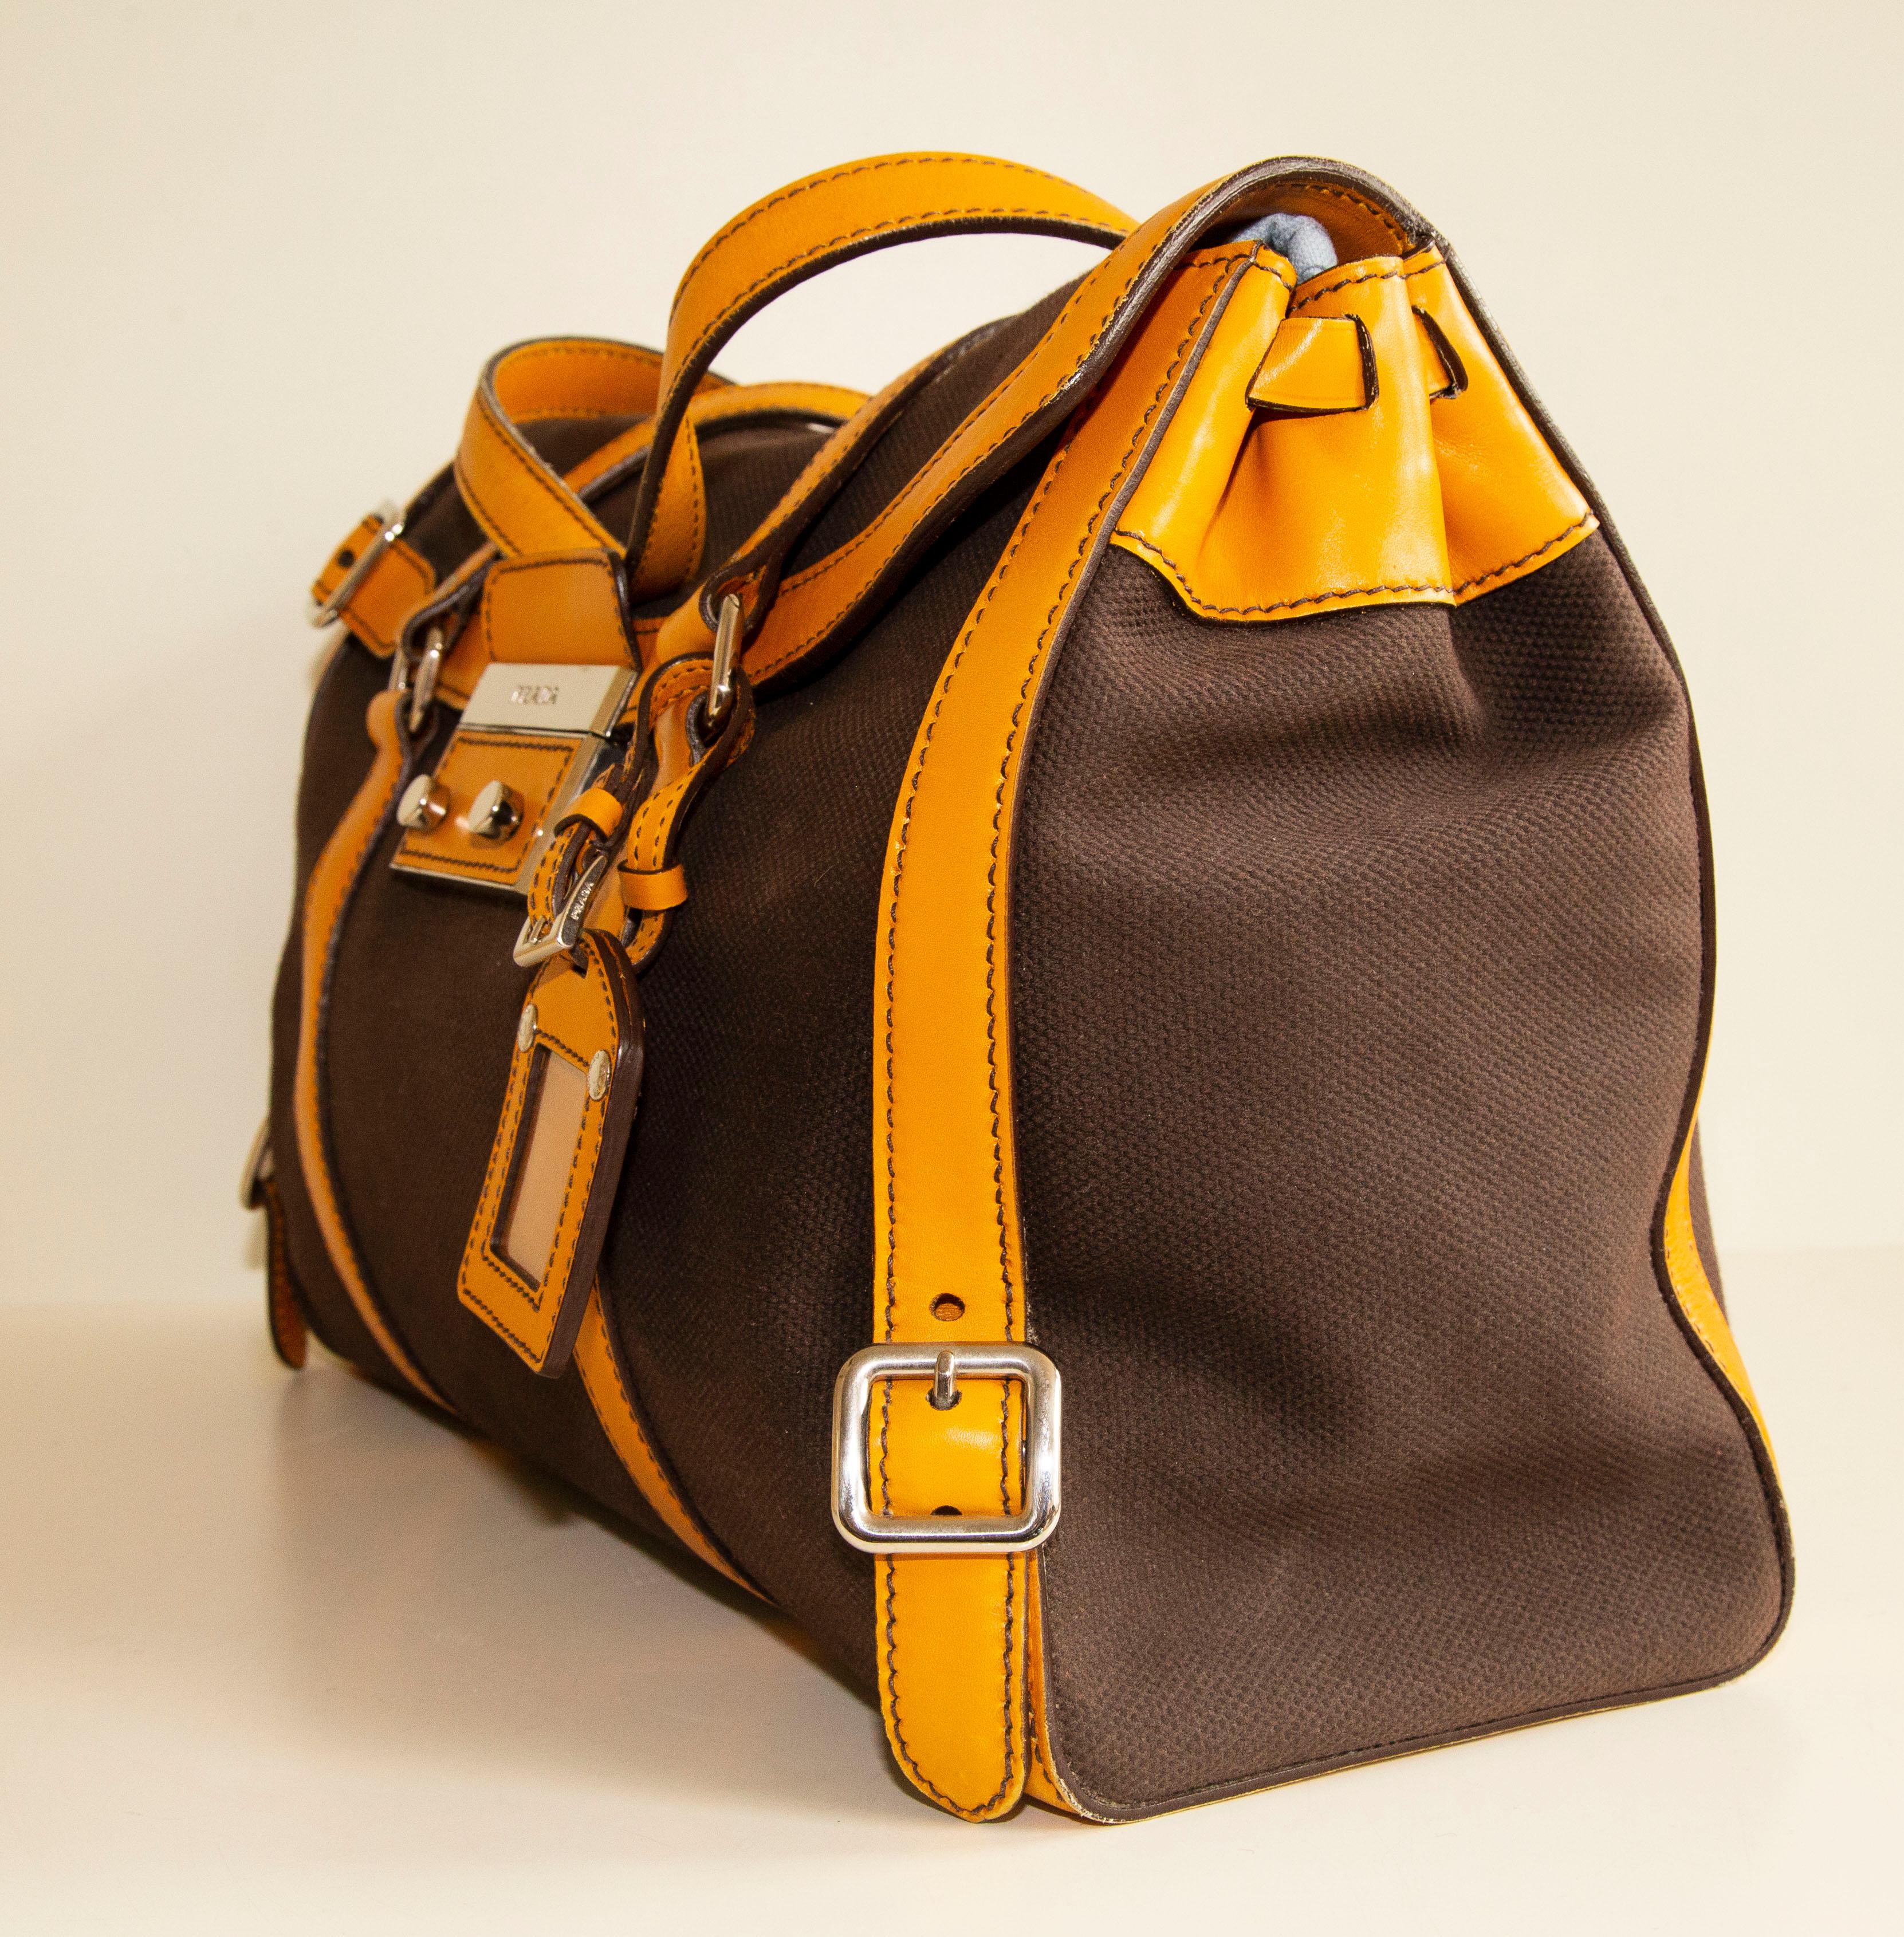 An authentic Prada shoulder bag. The bag features a brown canvas exterior, mustard yellow leather trim, and silver-tone hardware. The interior is lined with yellow leather and next to the major compartiment, there is one zipped pocket.  Tha bag is